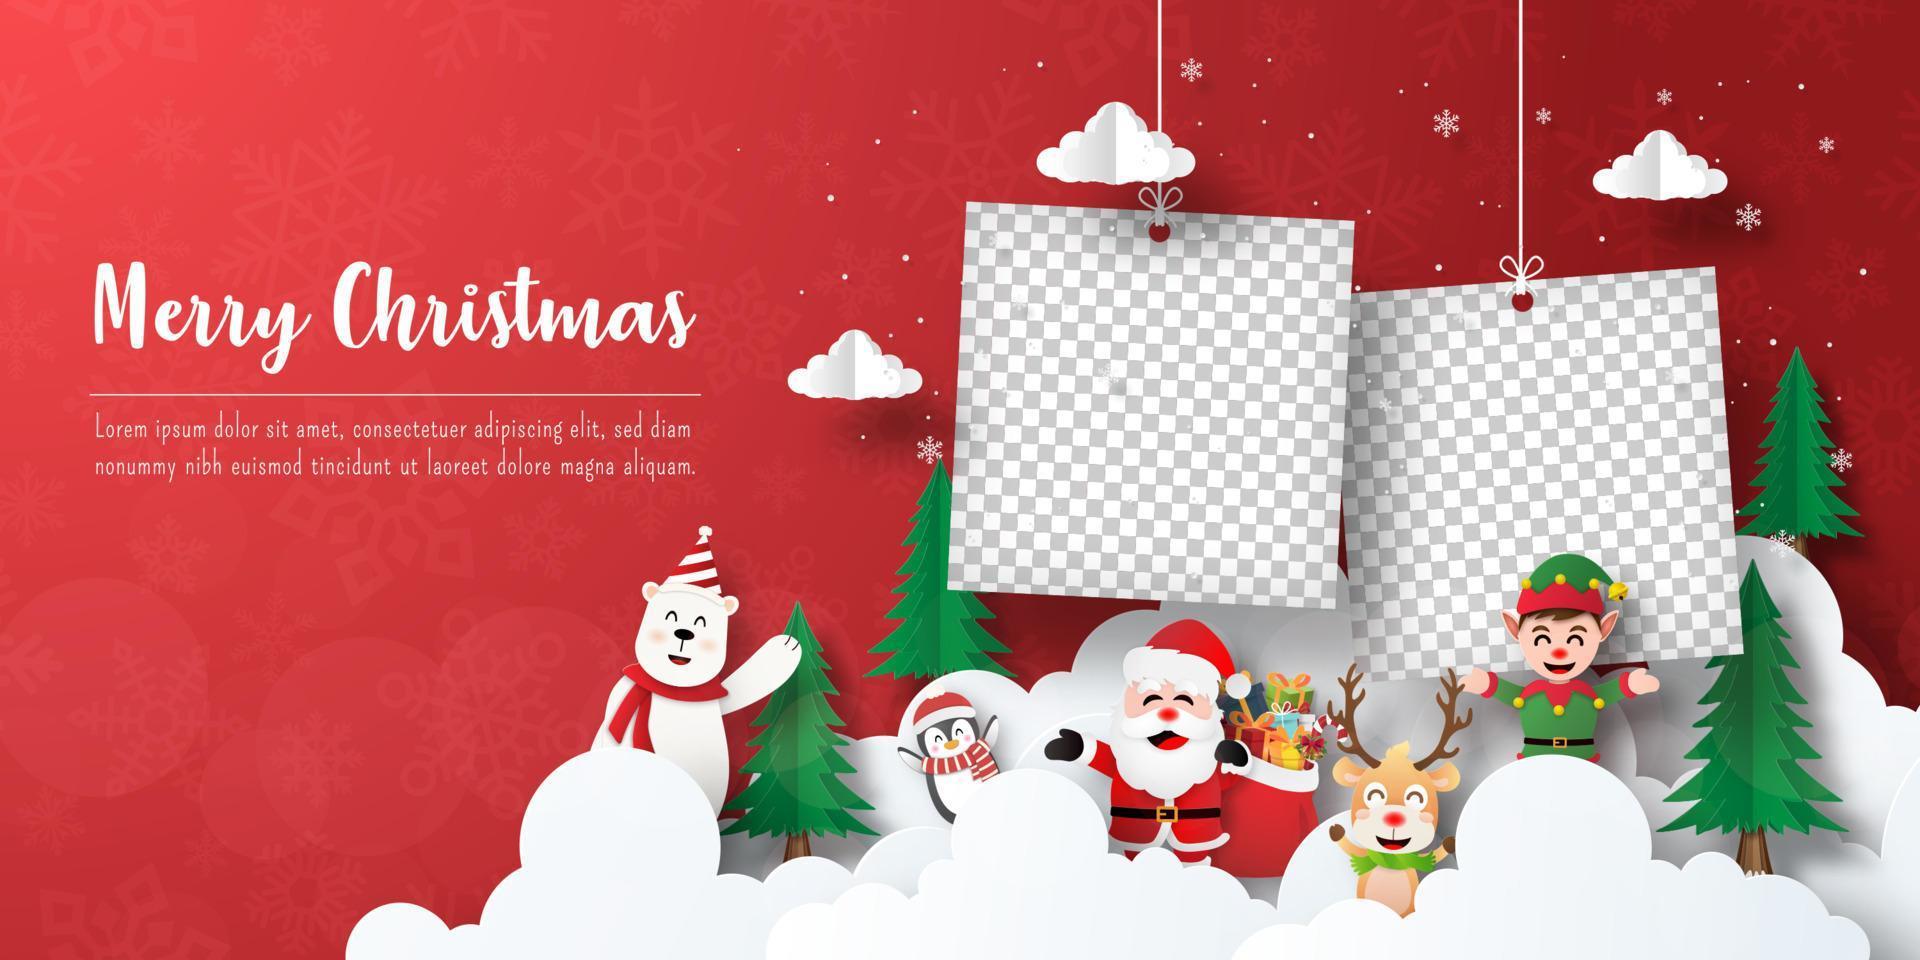 Merry Christmas and Happy New Year, Christmas banner postcard of Santa Claus and friends with blank photo frame vector